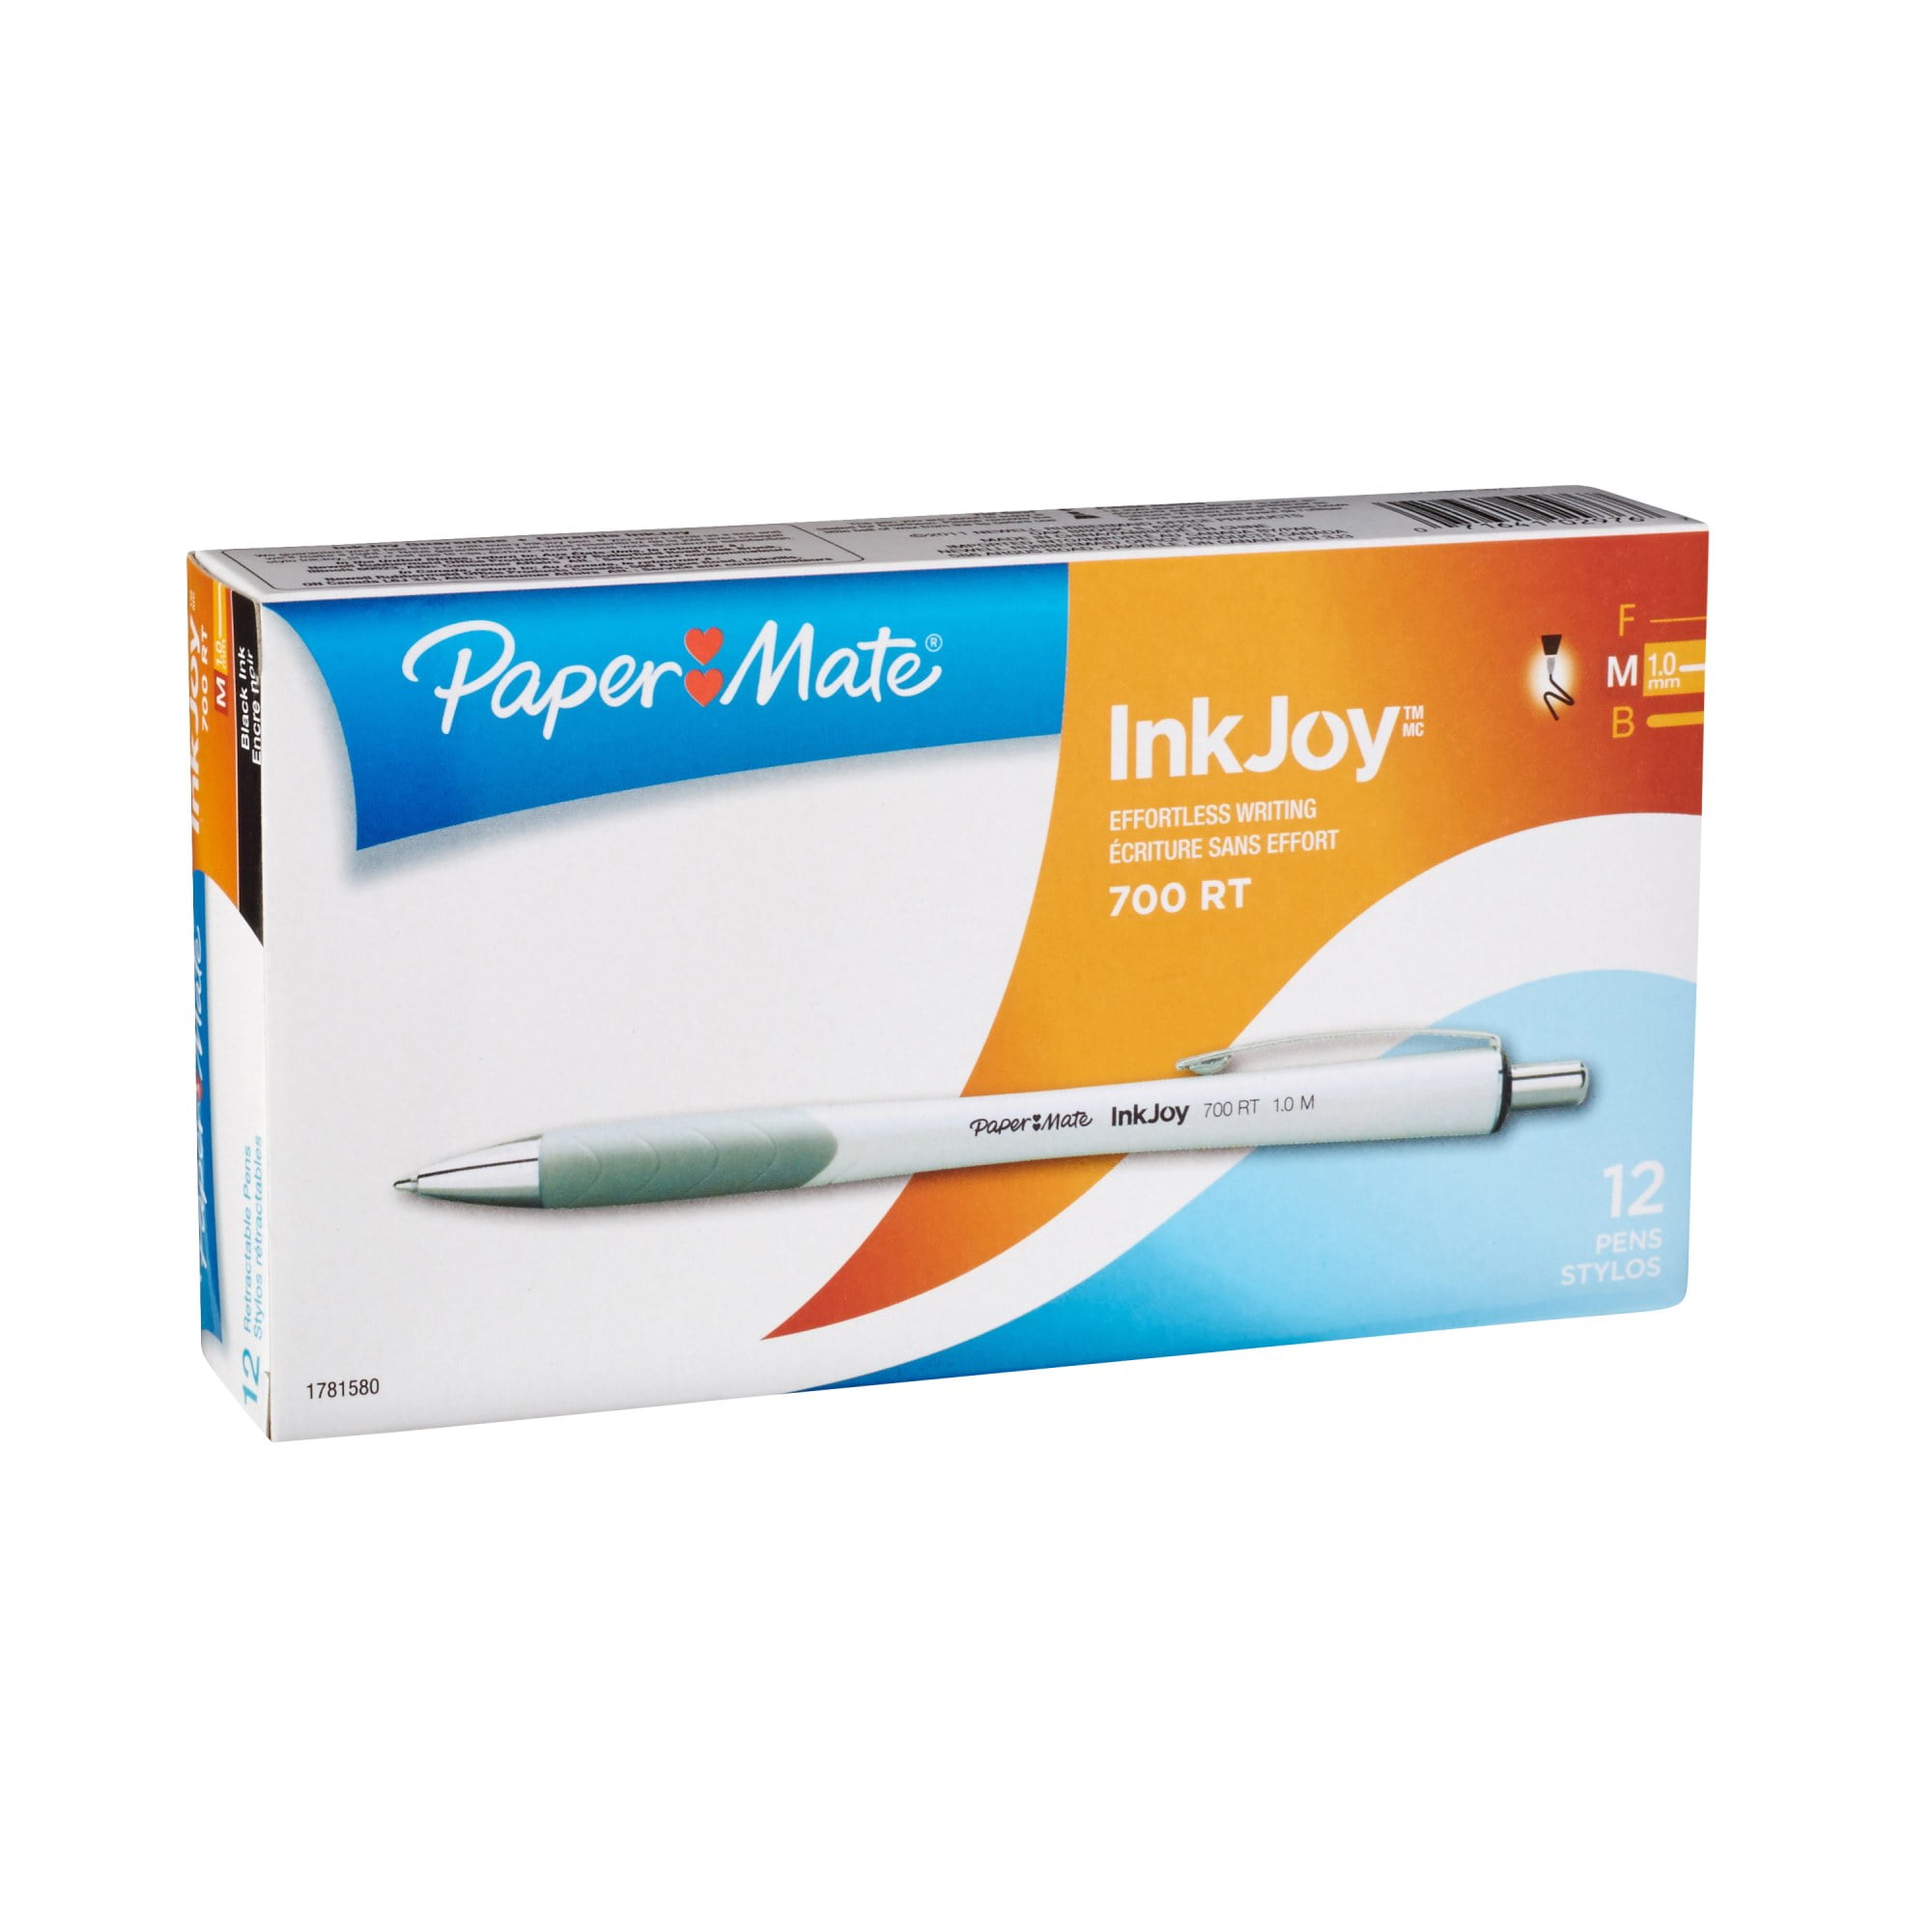 Details about   Paper Mate InkJoy 700 RT Retractable Ballpoint Pen 1mm Blue Ink White Barrel 